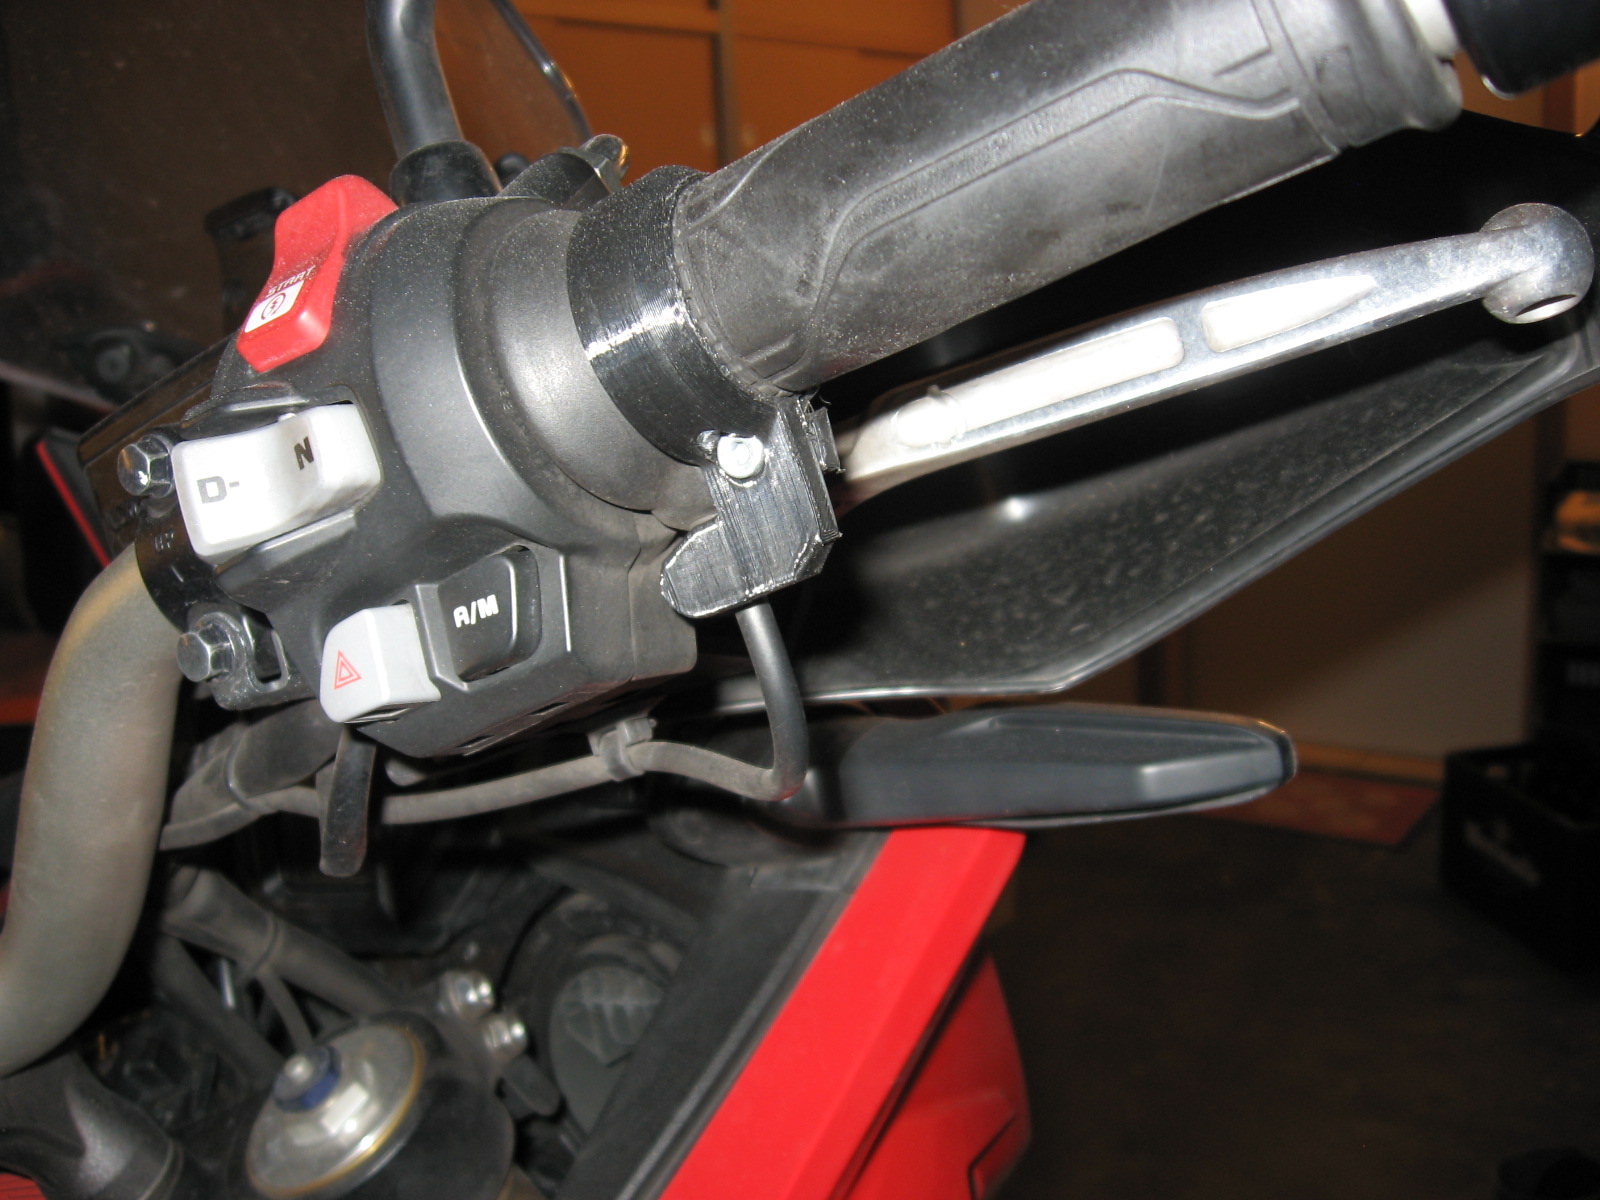 Thumb support for motorcycle throttle grip